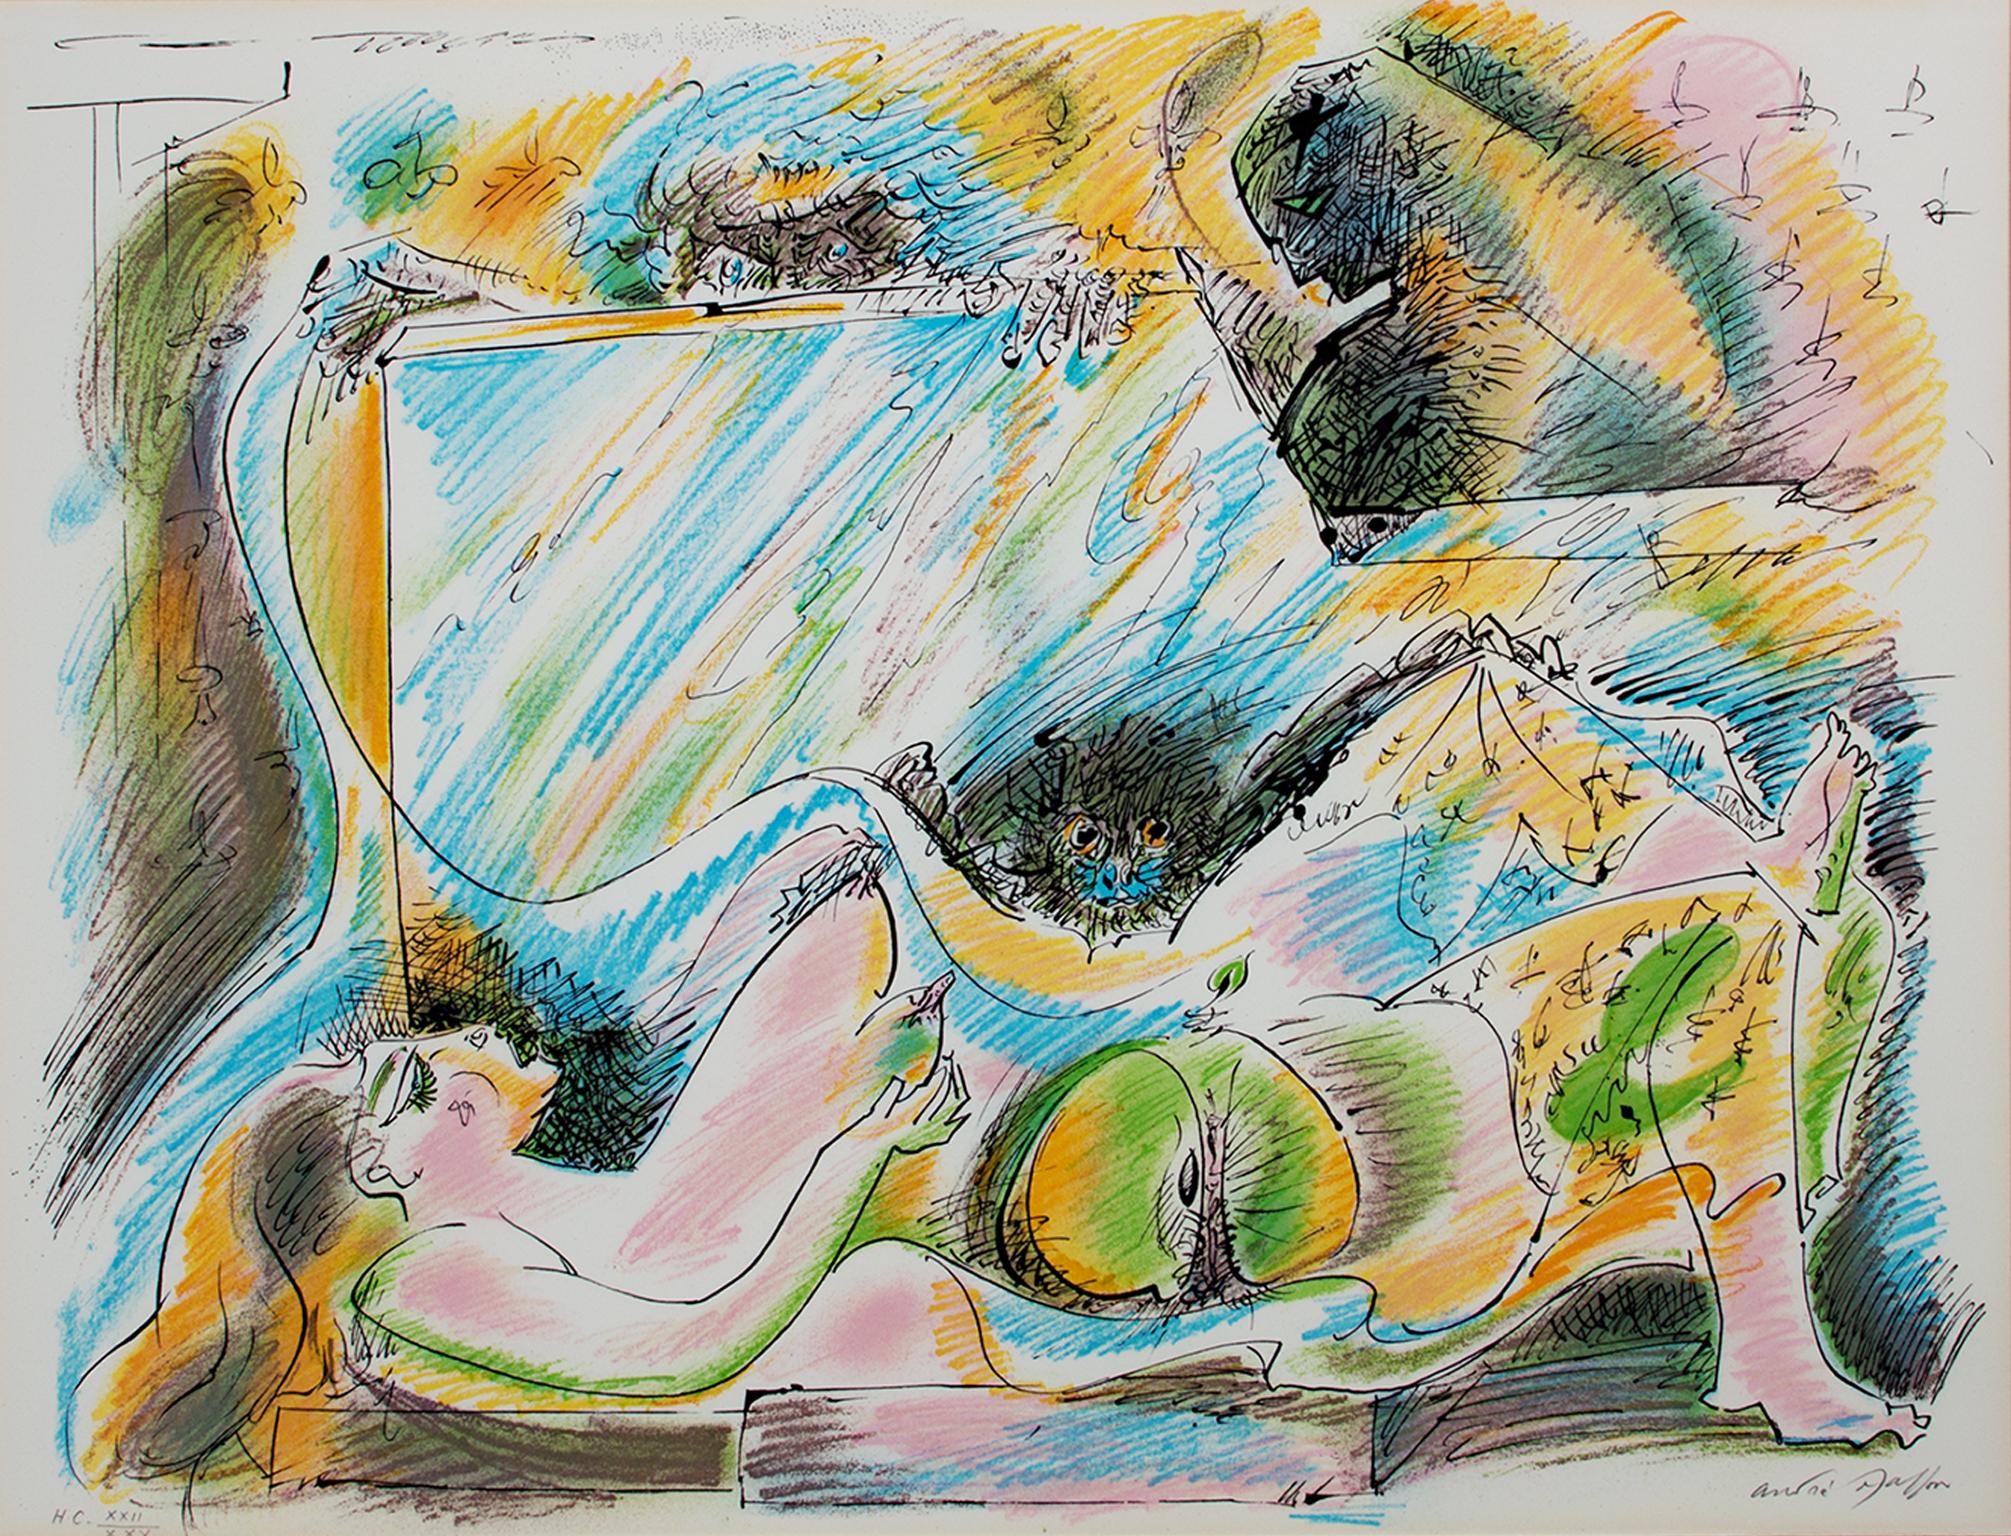 André Masson Figurative Print - "La Naissance D'Eve" from "Je Reve, "  Color Lithograph signed by Andre Masson 